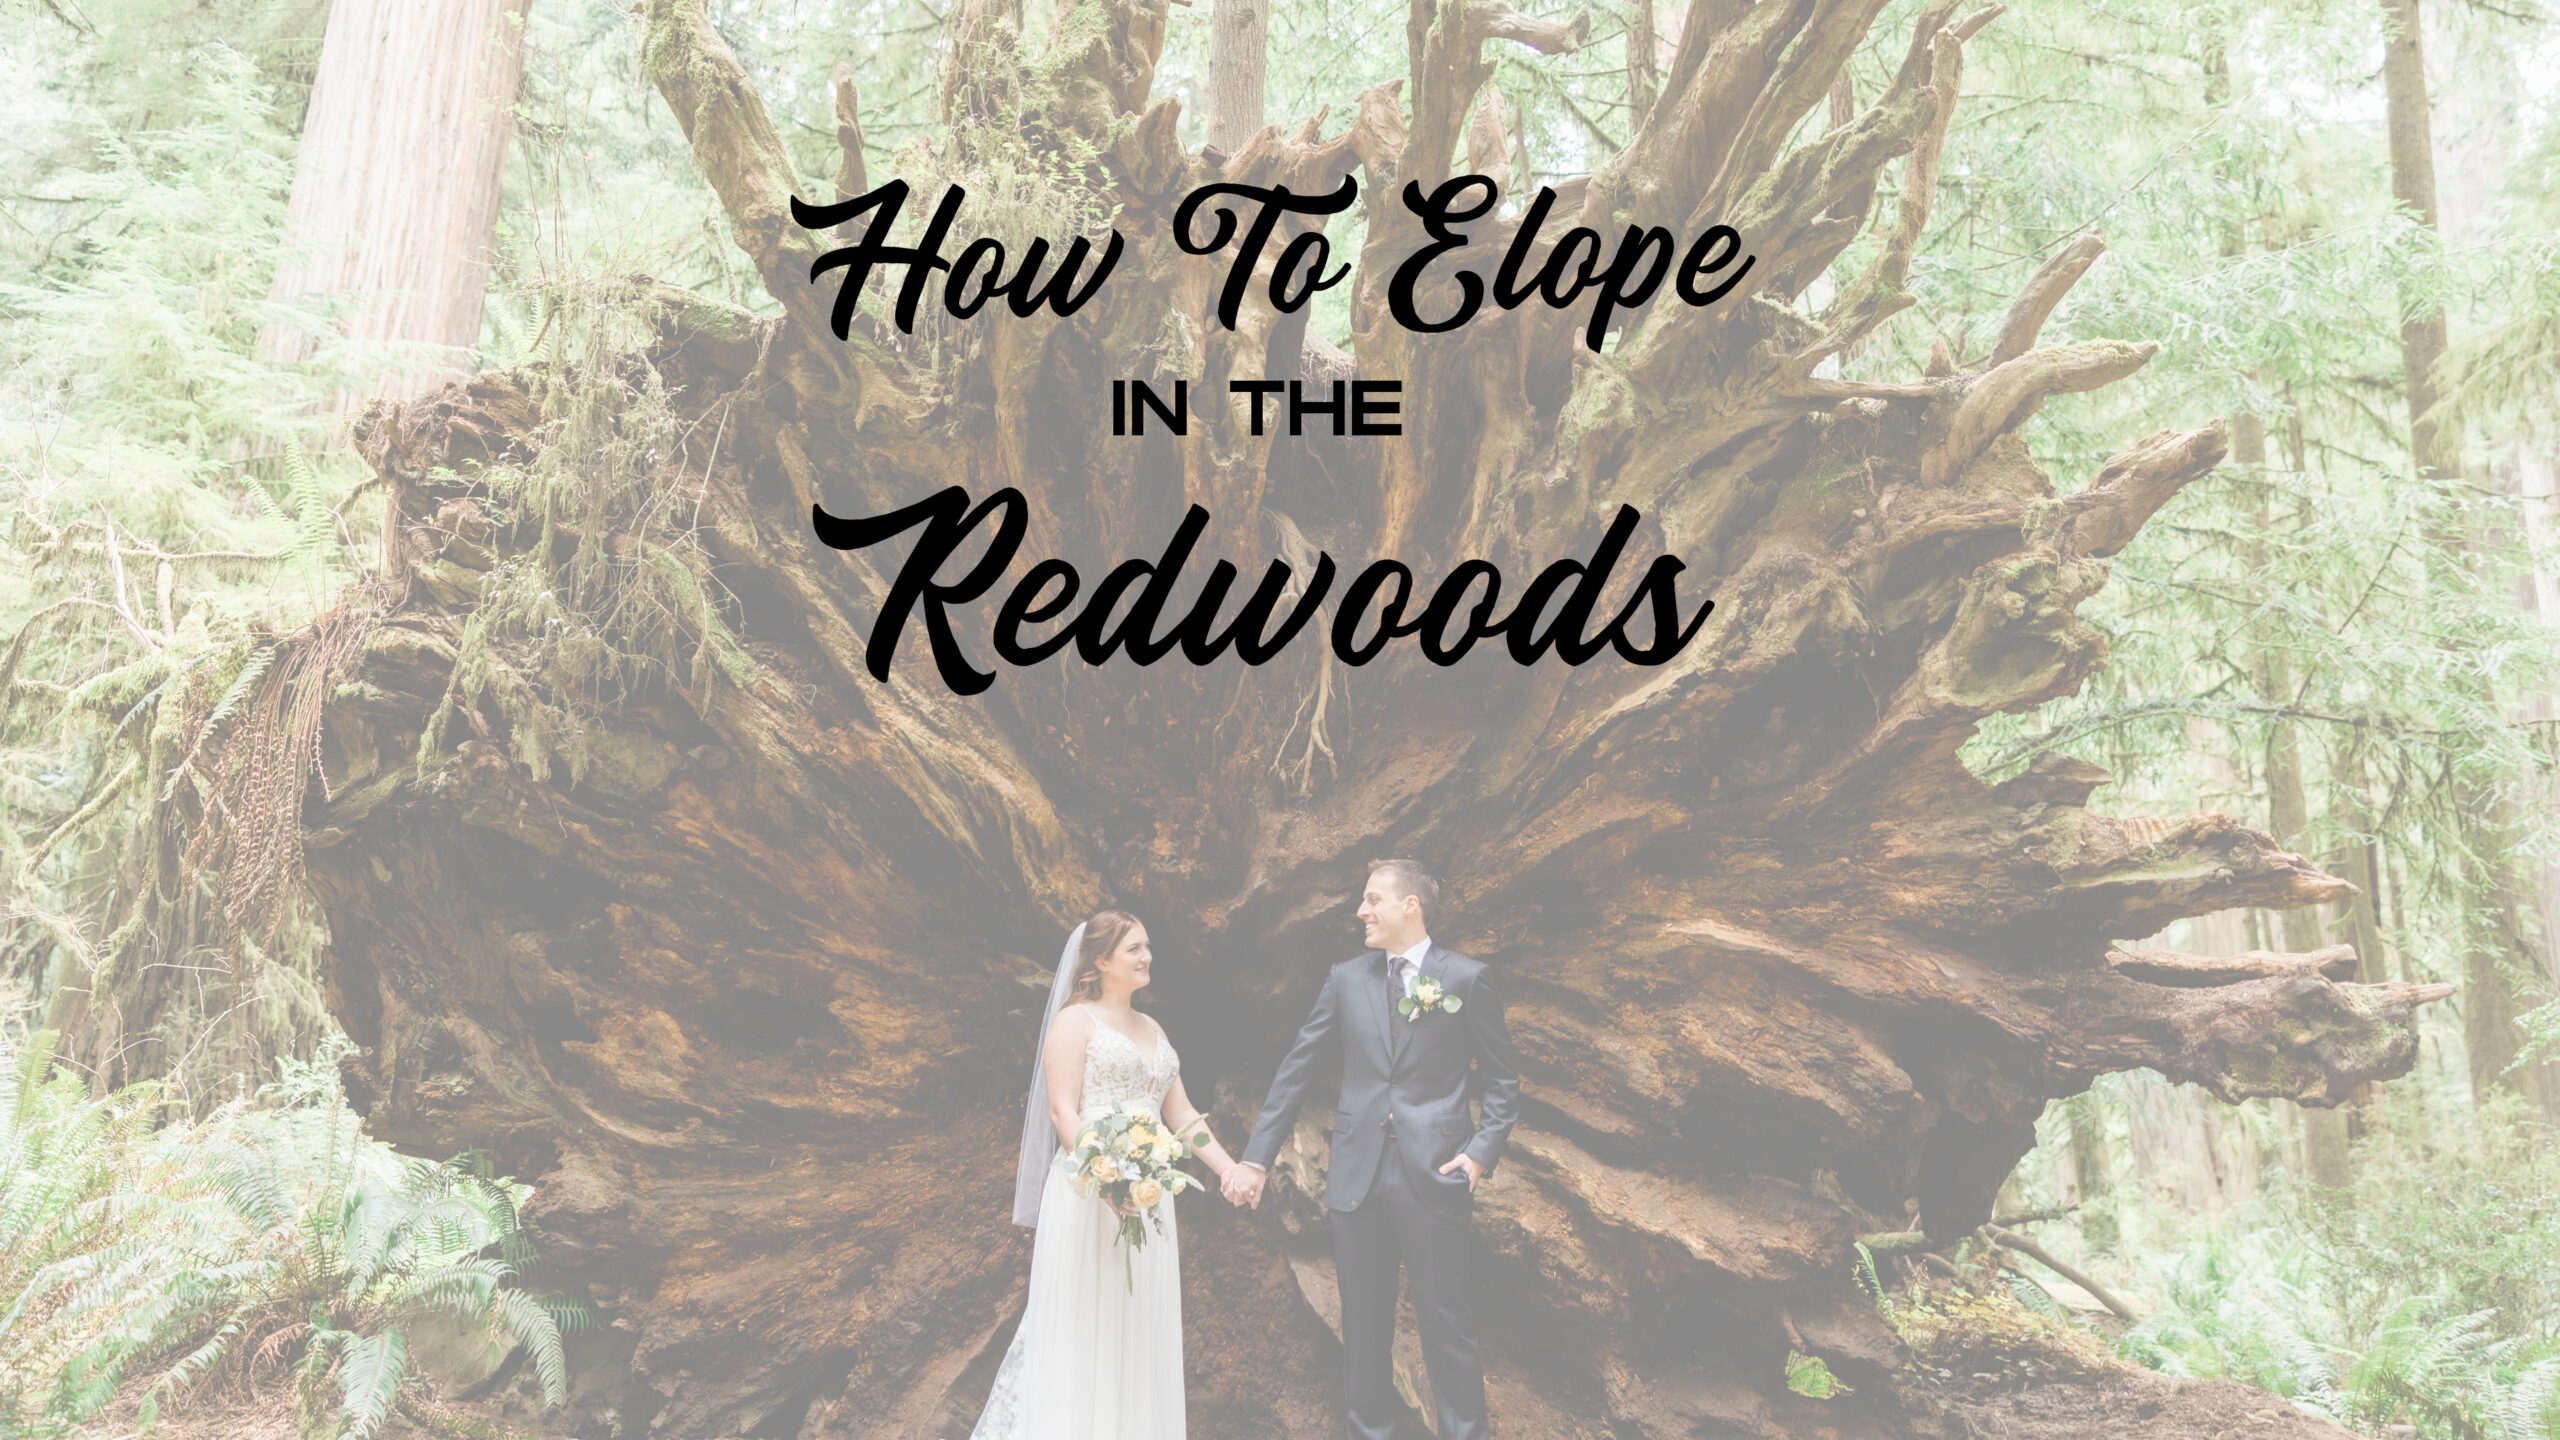 Redwood-Guide-scaled How to Plan Your Dream California Redwood Elopement: A Step-by-Step Guide